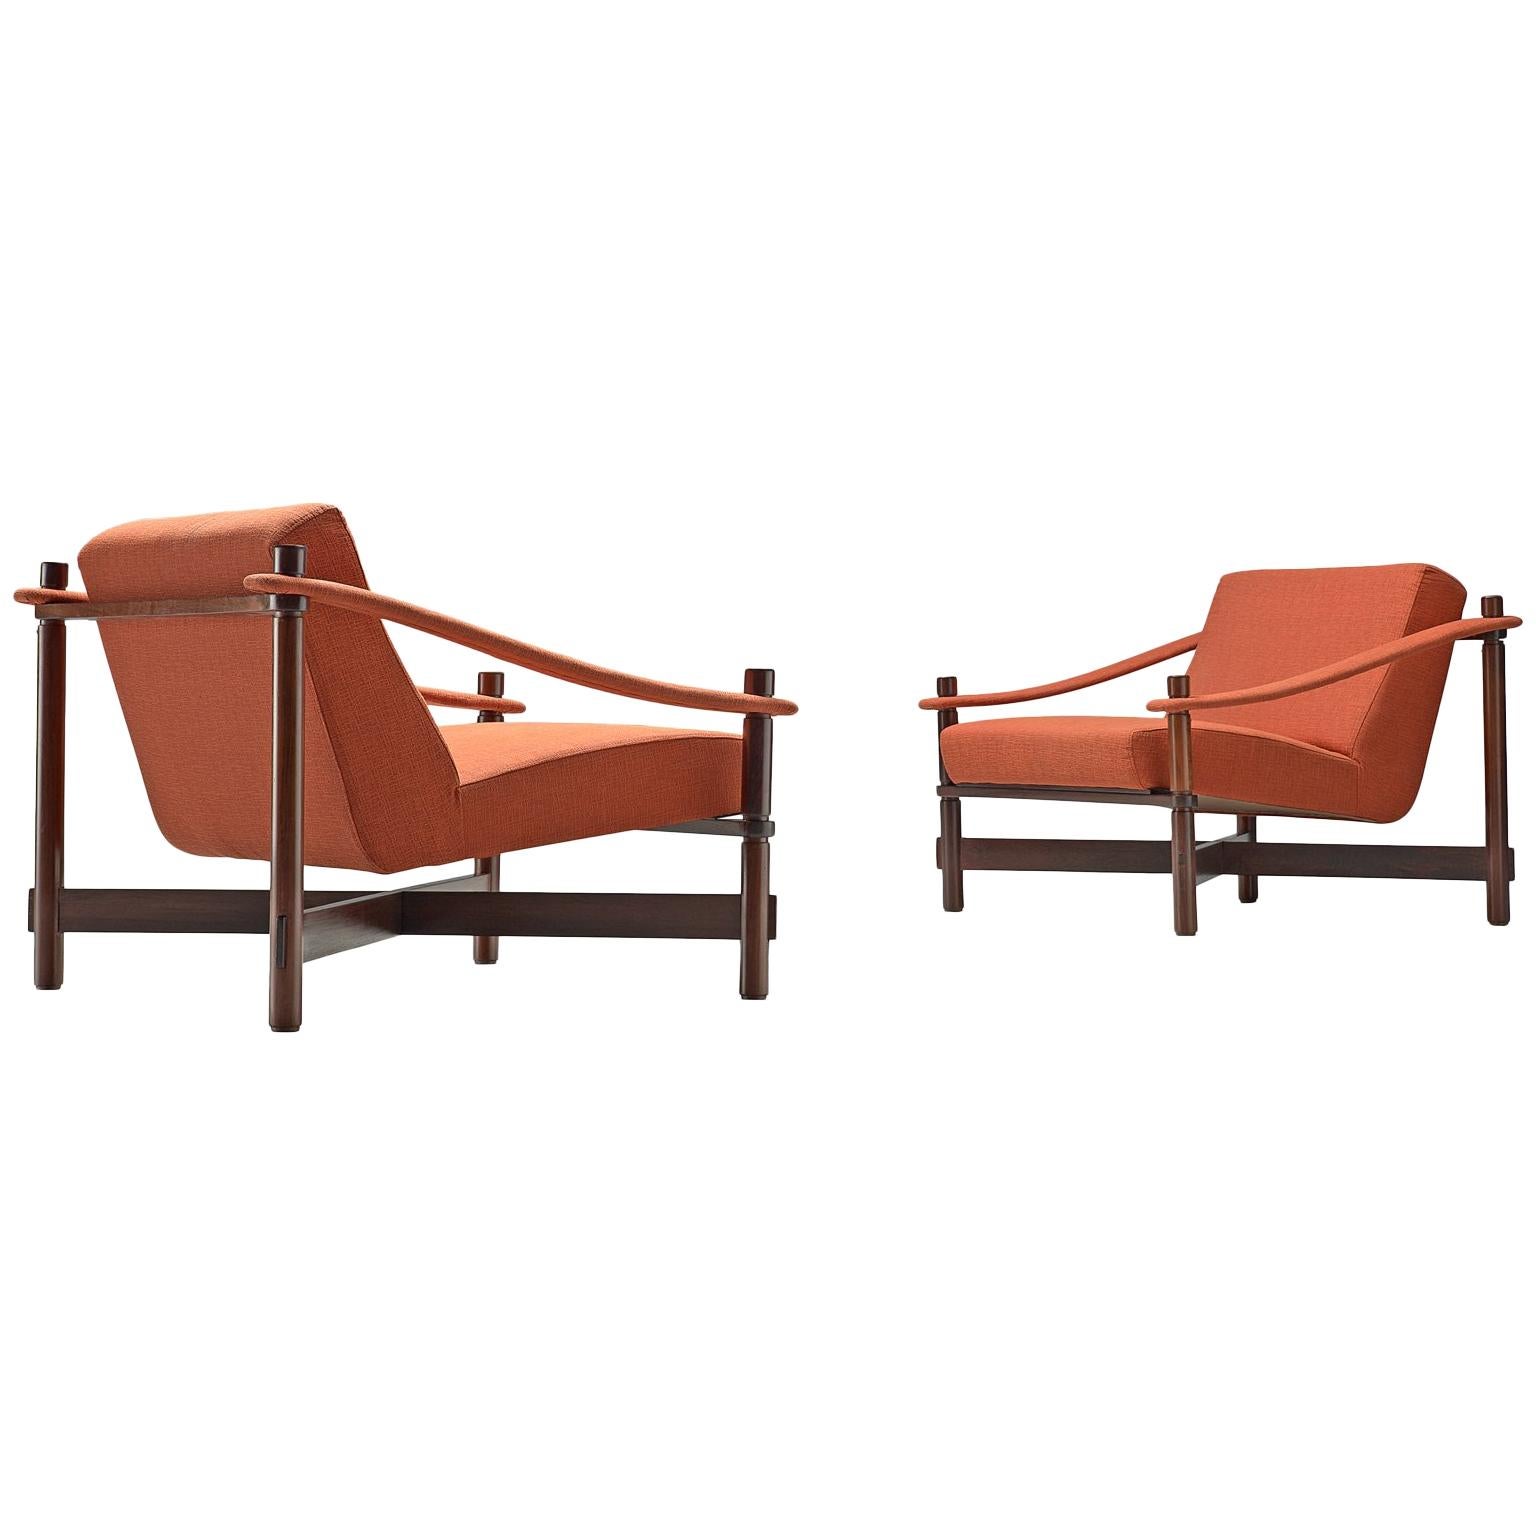 Michel Arnoult, Set of Brazilian Lounge Chairs in Rosewood, 1965